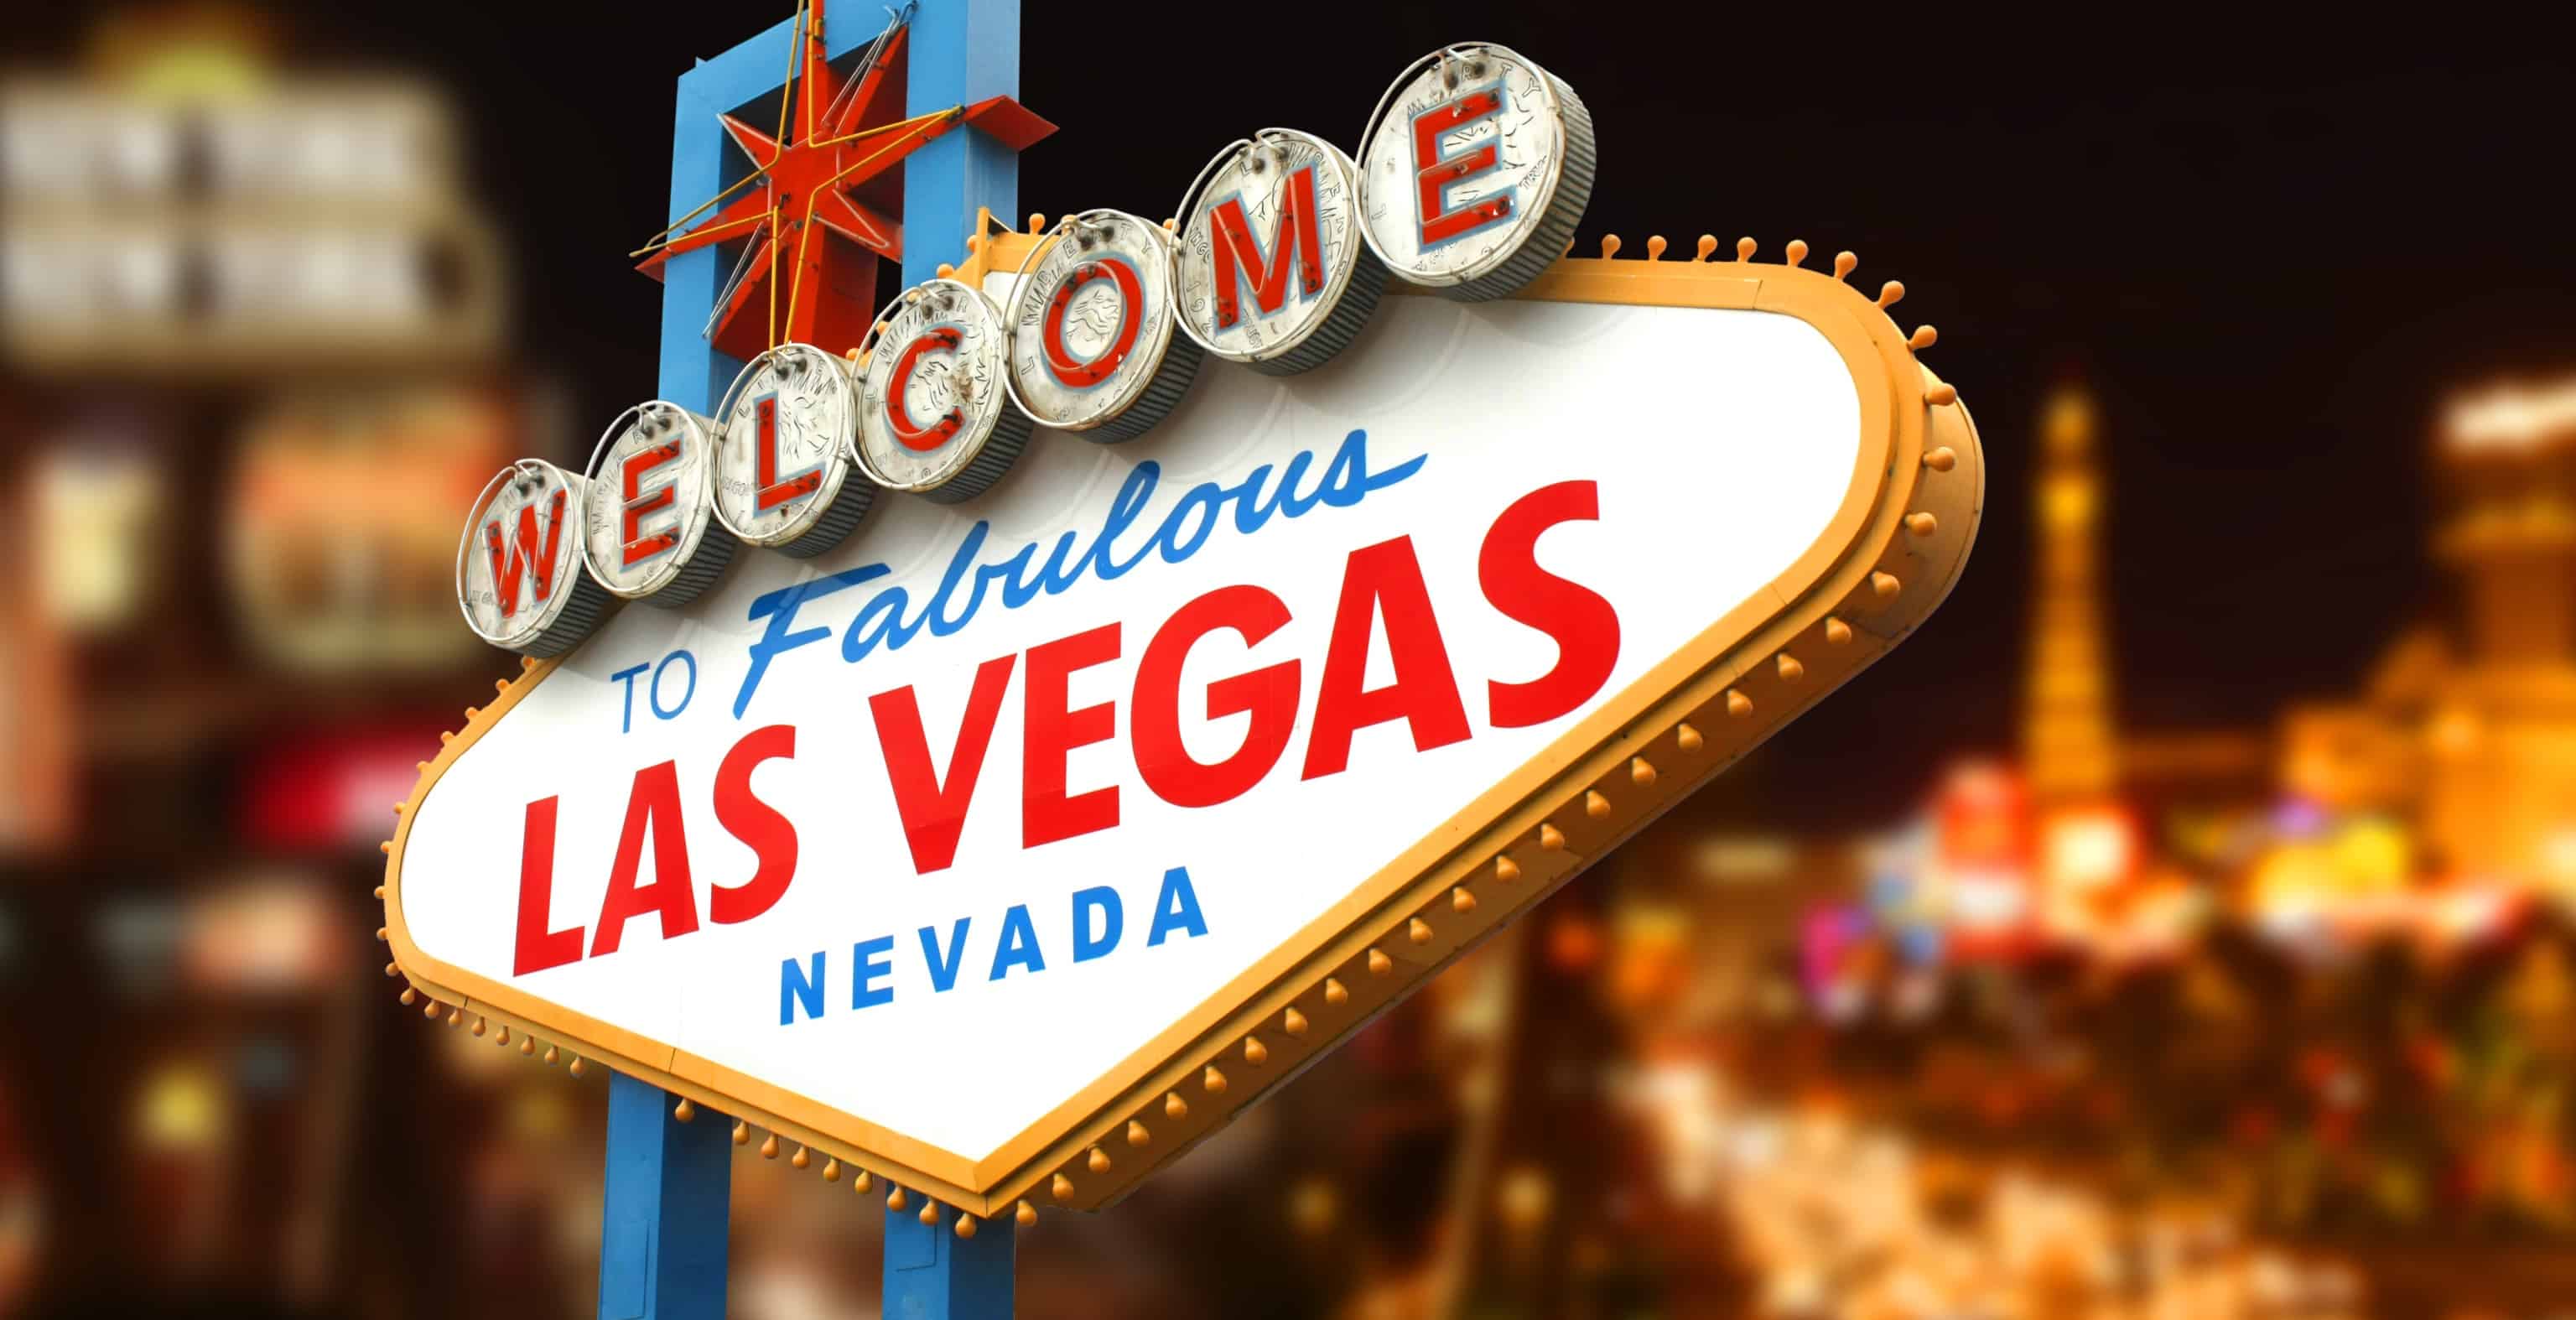 More than 42 million people visited Las Vegas in 2019